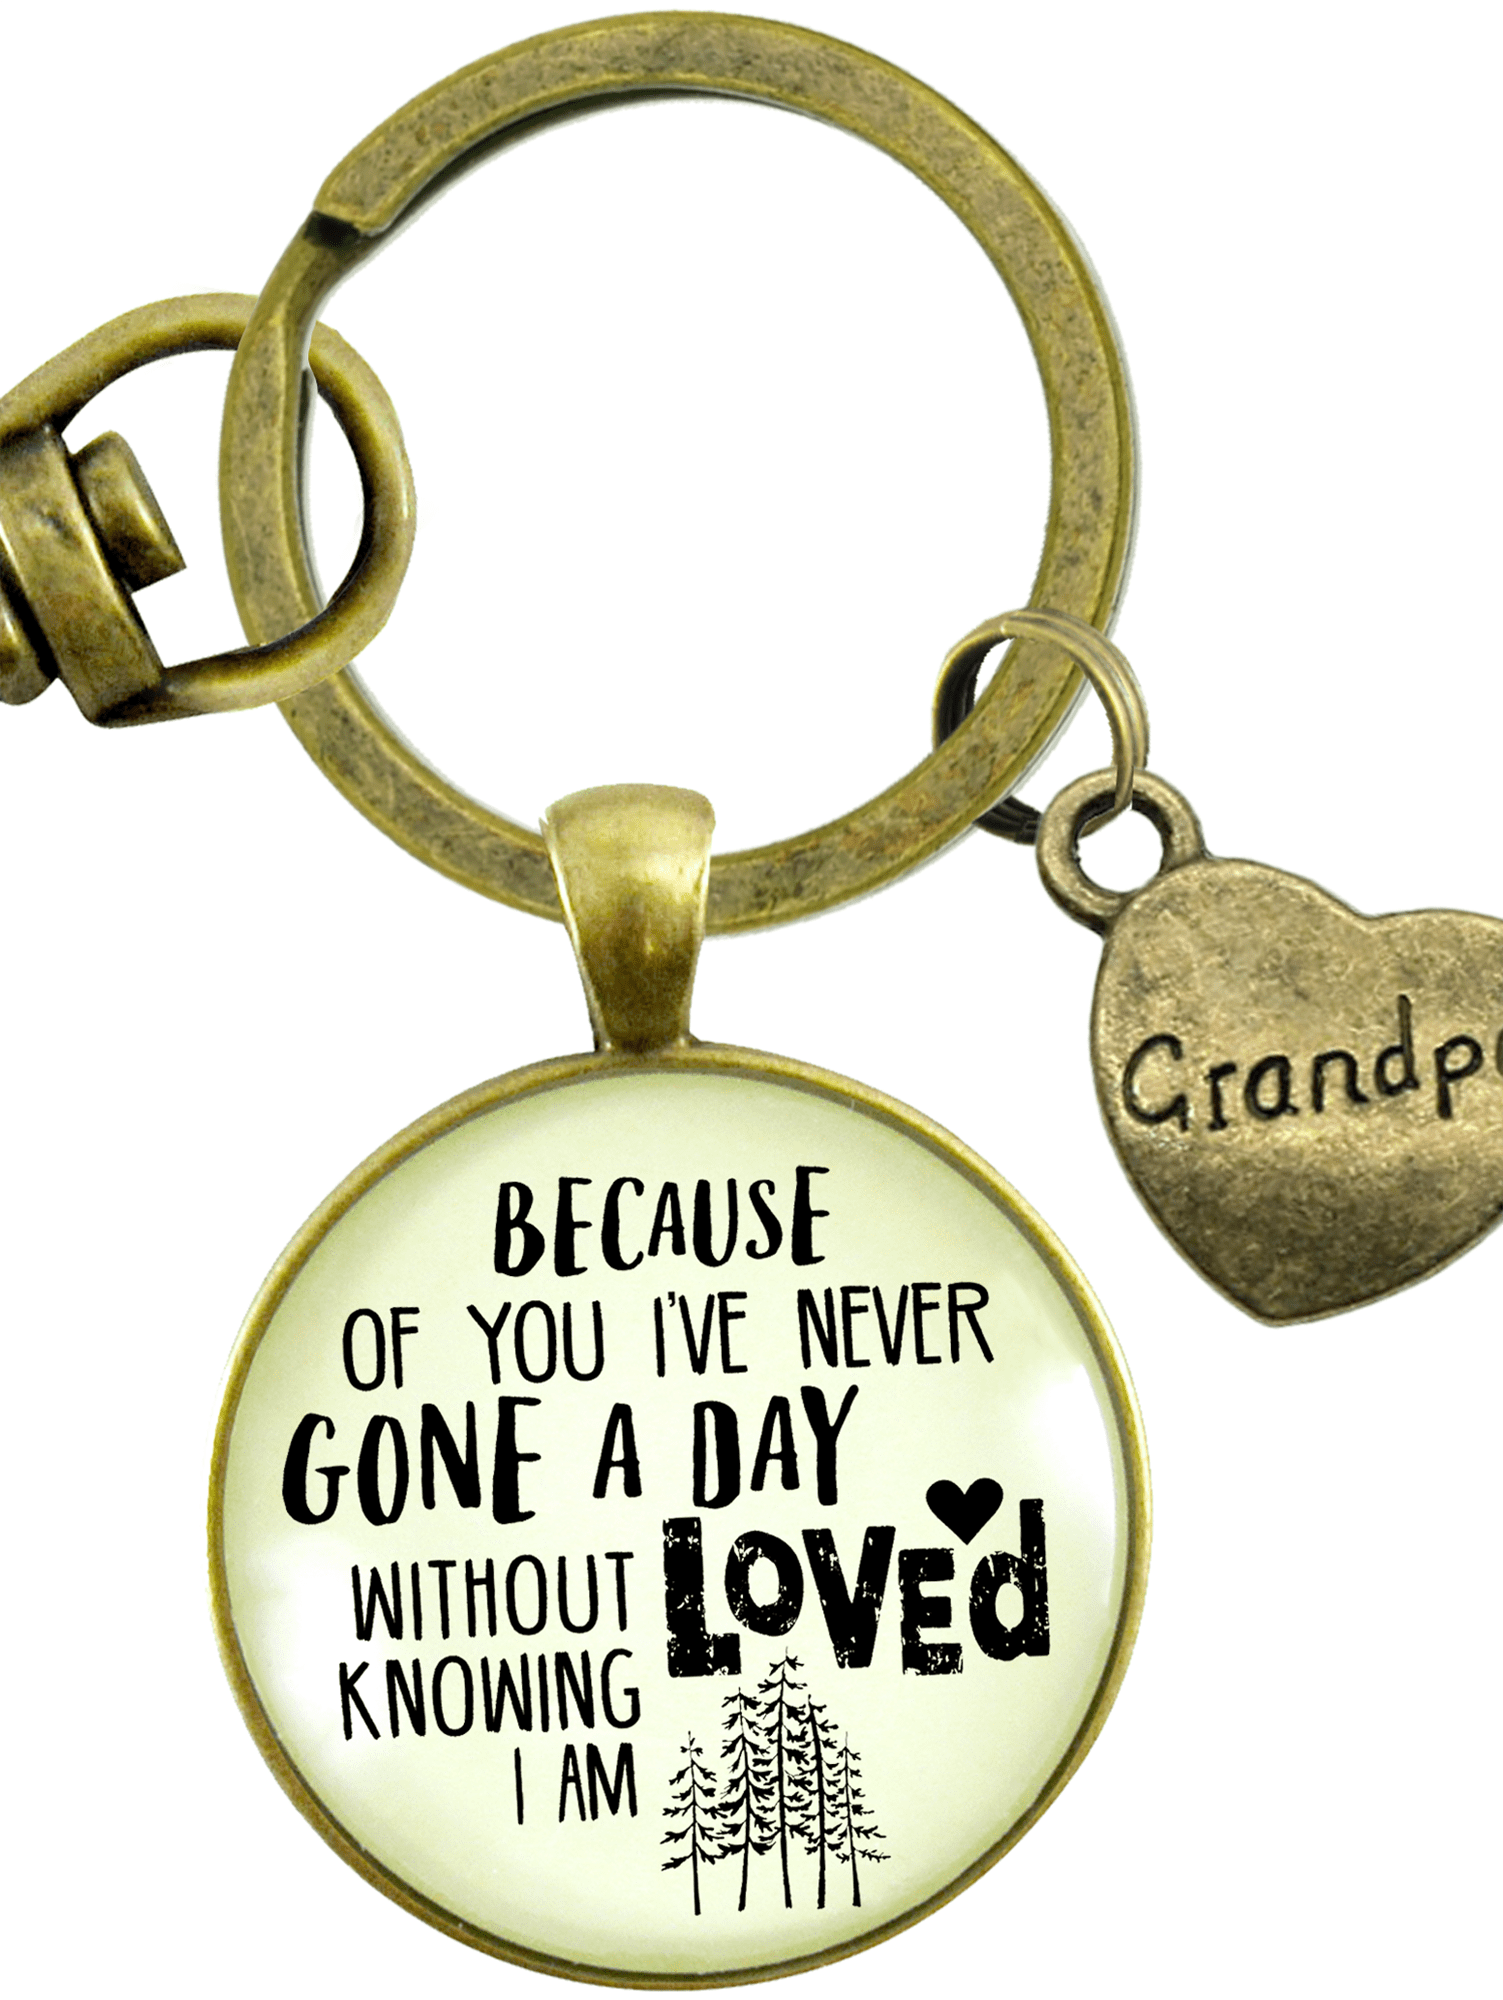 Grandma Christmas Birthday Gifts Keychain I Love You to The Moon and Back Gifts for Grandmother Mothers Day Valentine Gifts from Grandchild Grandson Goddaughter to Grandmother Gifts Jewelry